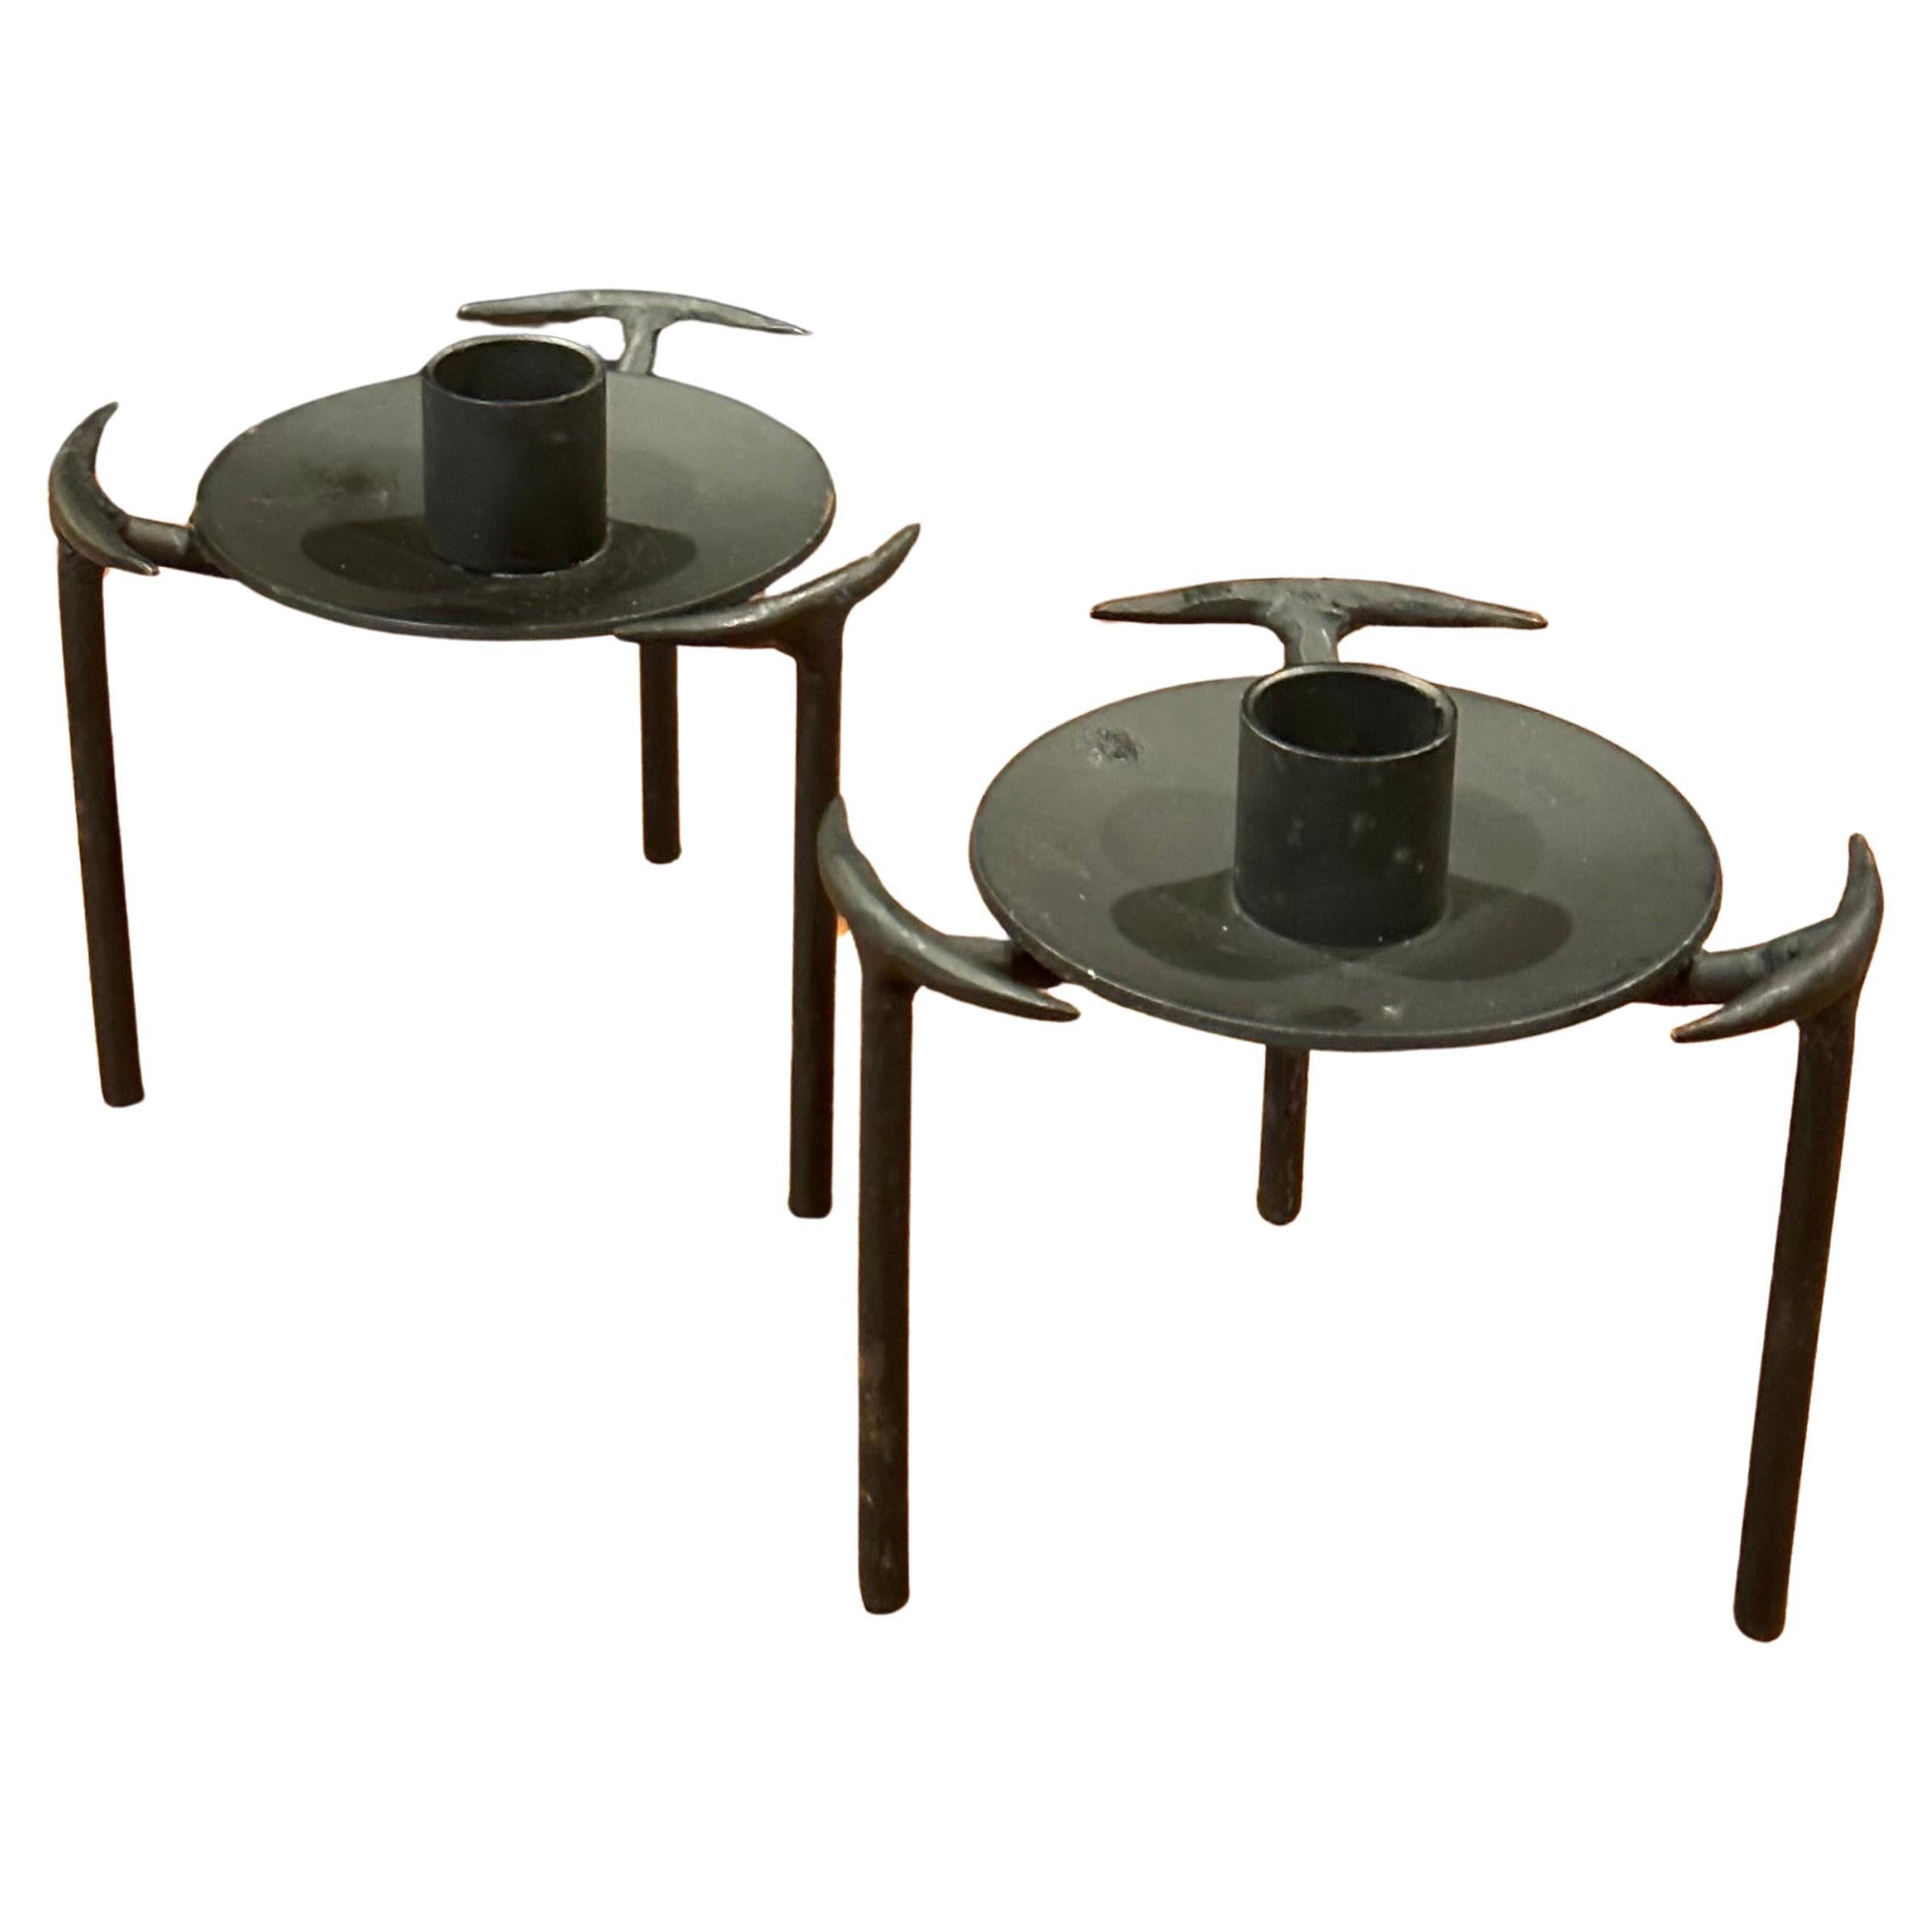 A nice pair of Modernist cut steel candle holders, circa 1970s.  The set is in very good vintage condition and measures 5